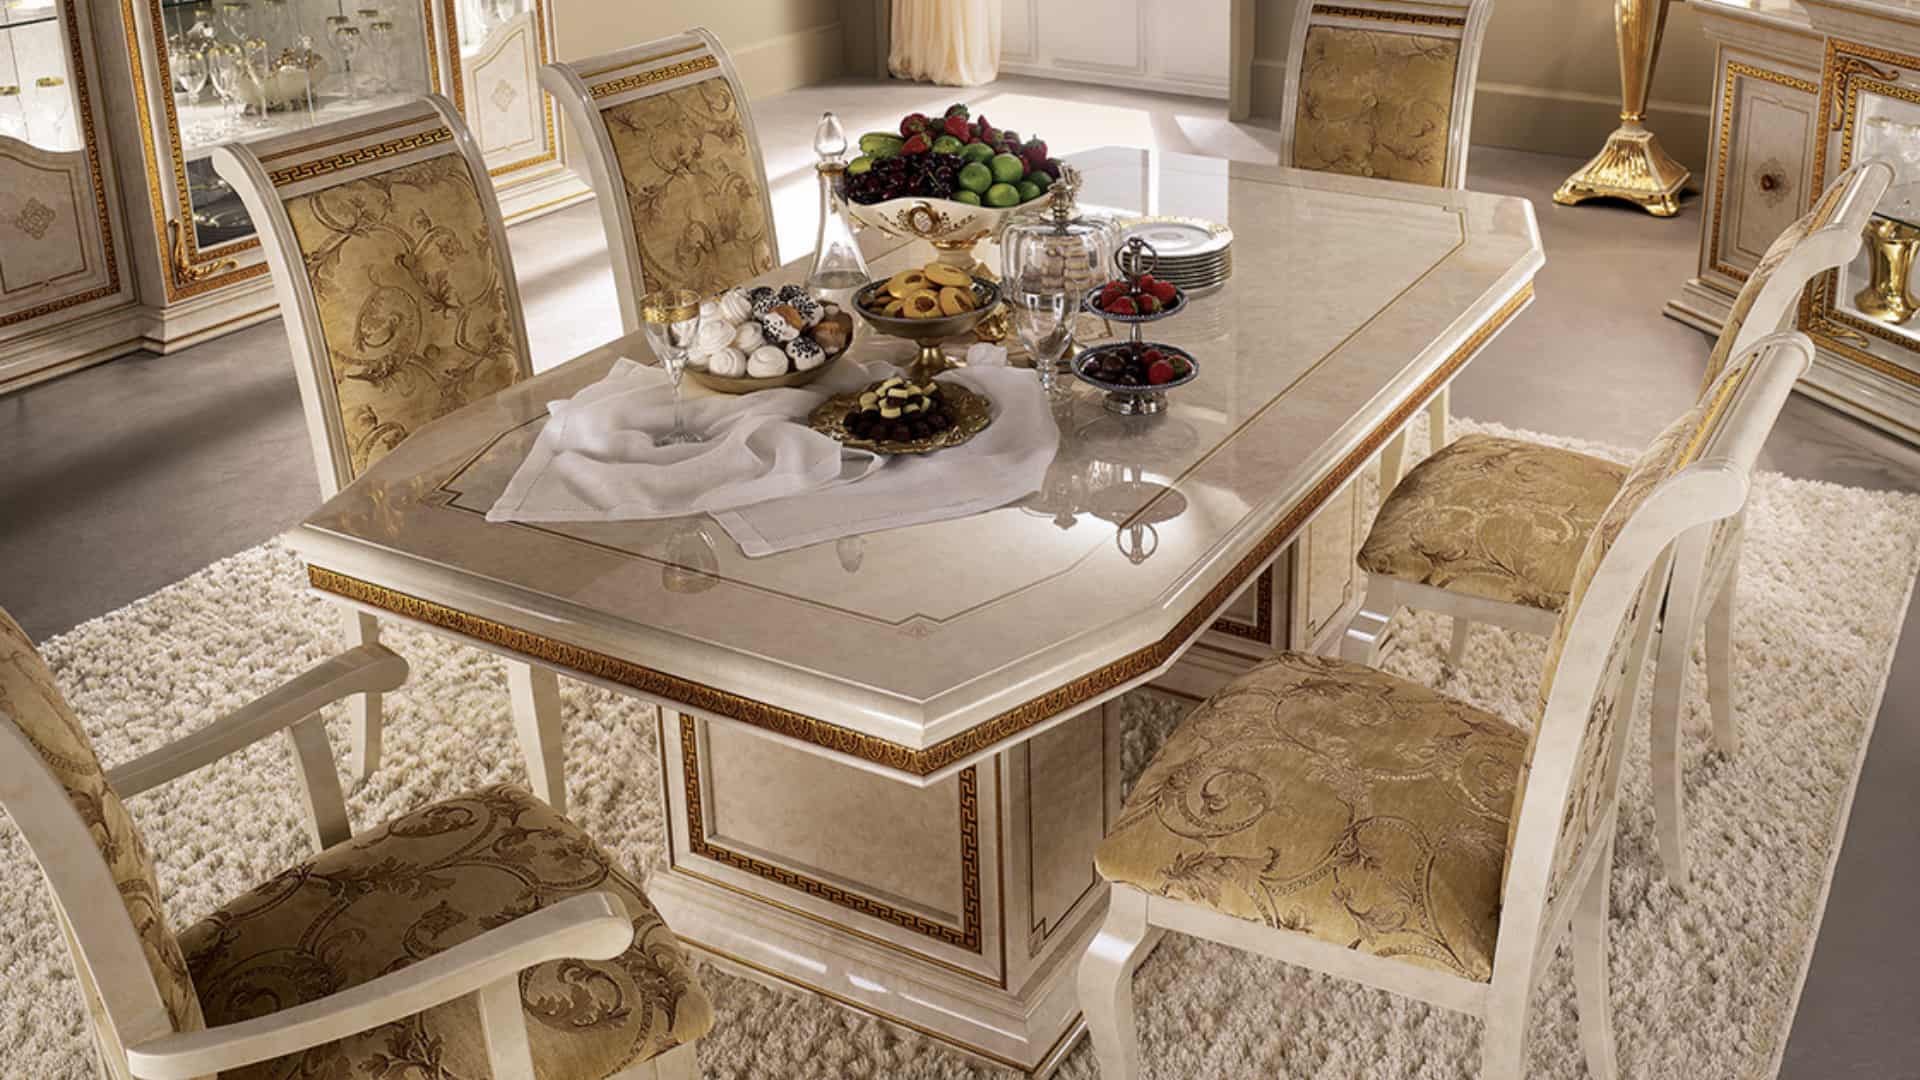 Neoclassical dining table: how to choose the best one for your dining room